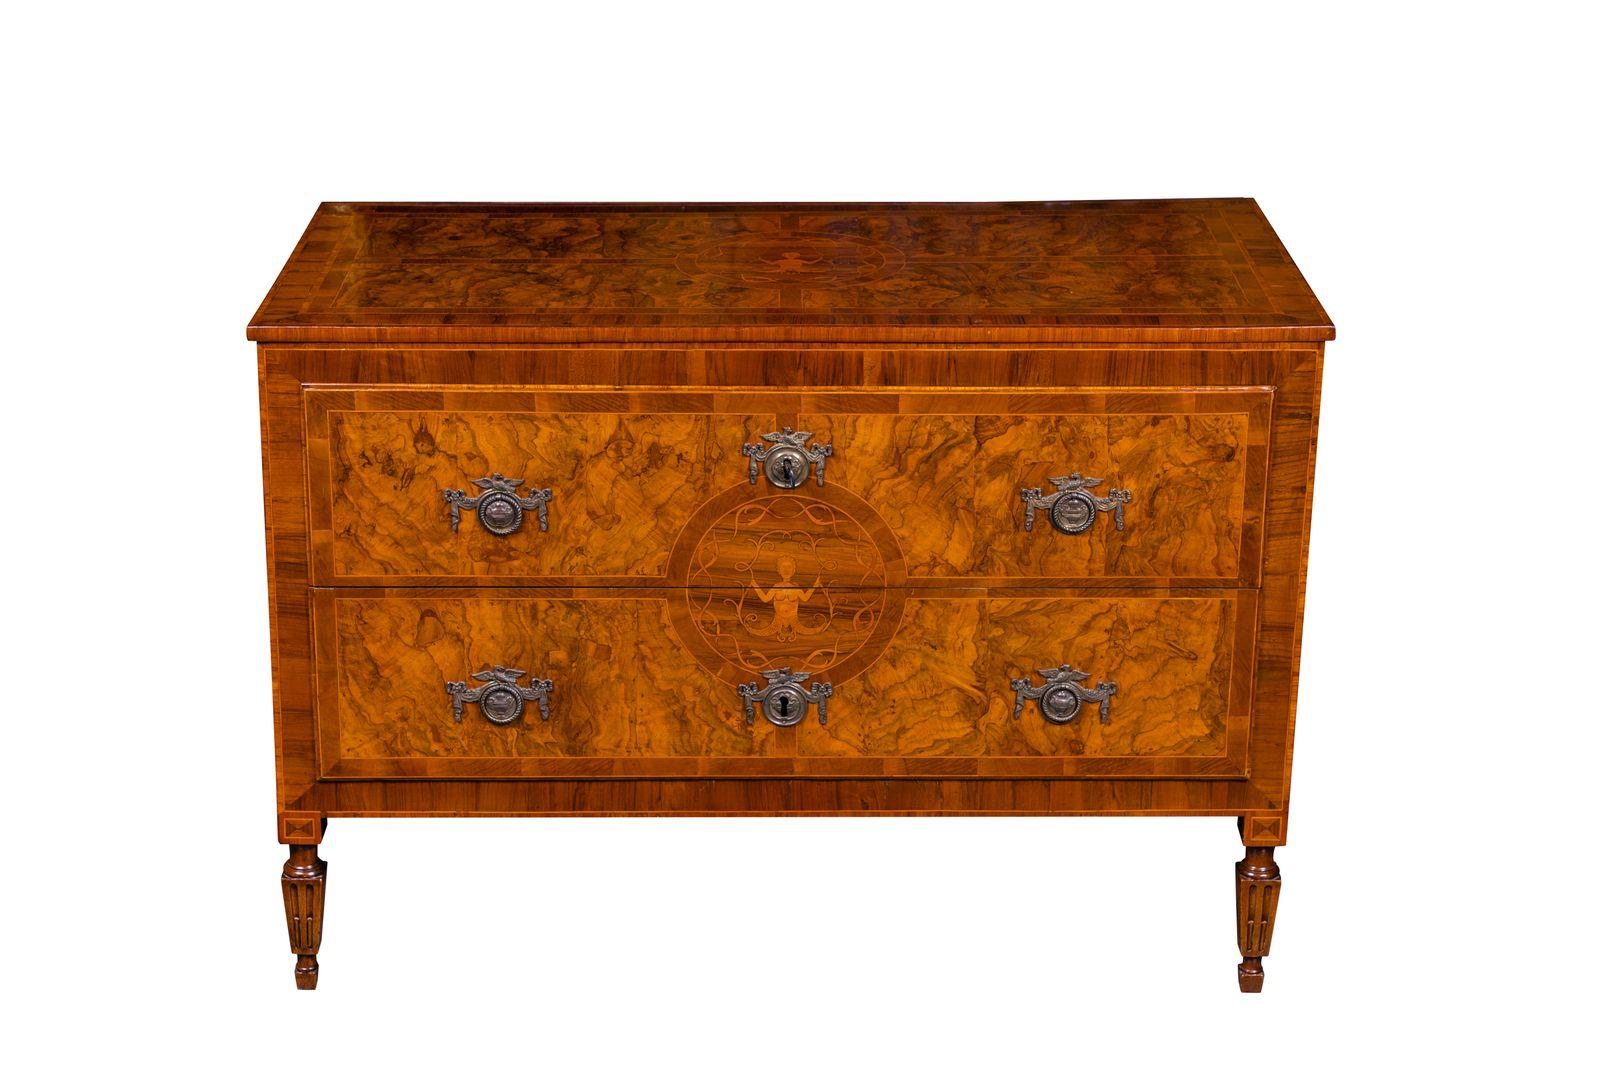 An absolutely glorious pair of c. 1780, hand-carved, two-drawer, veneered and marquetry inlaid commodes from Lombardi, Italy. Each in burl and walnut, and featuring medallions of a mythical creature surrounded by intertwining scrolls.